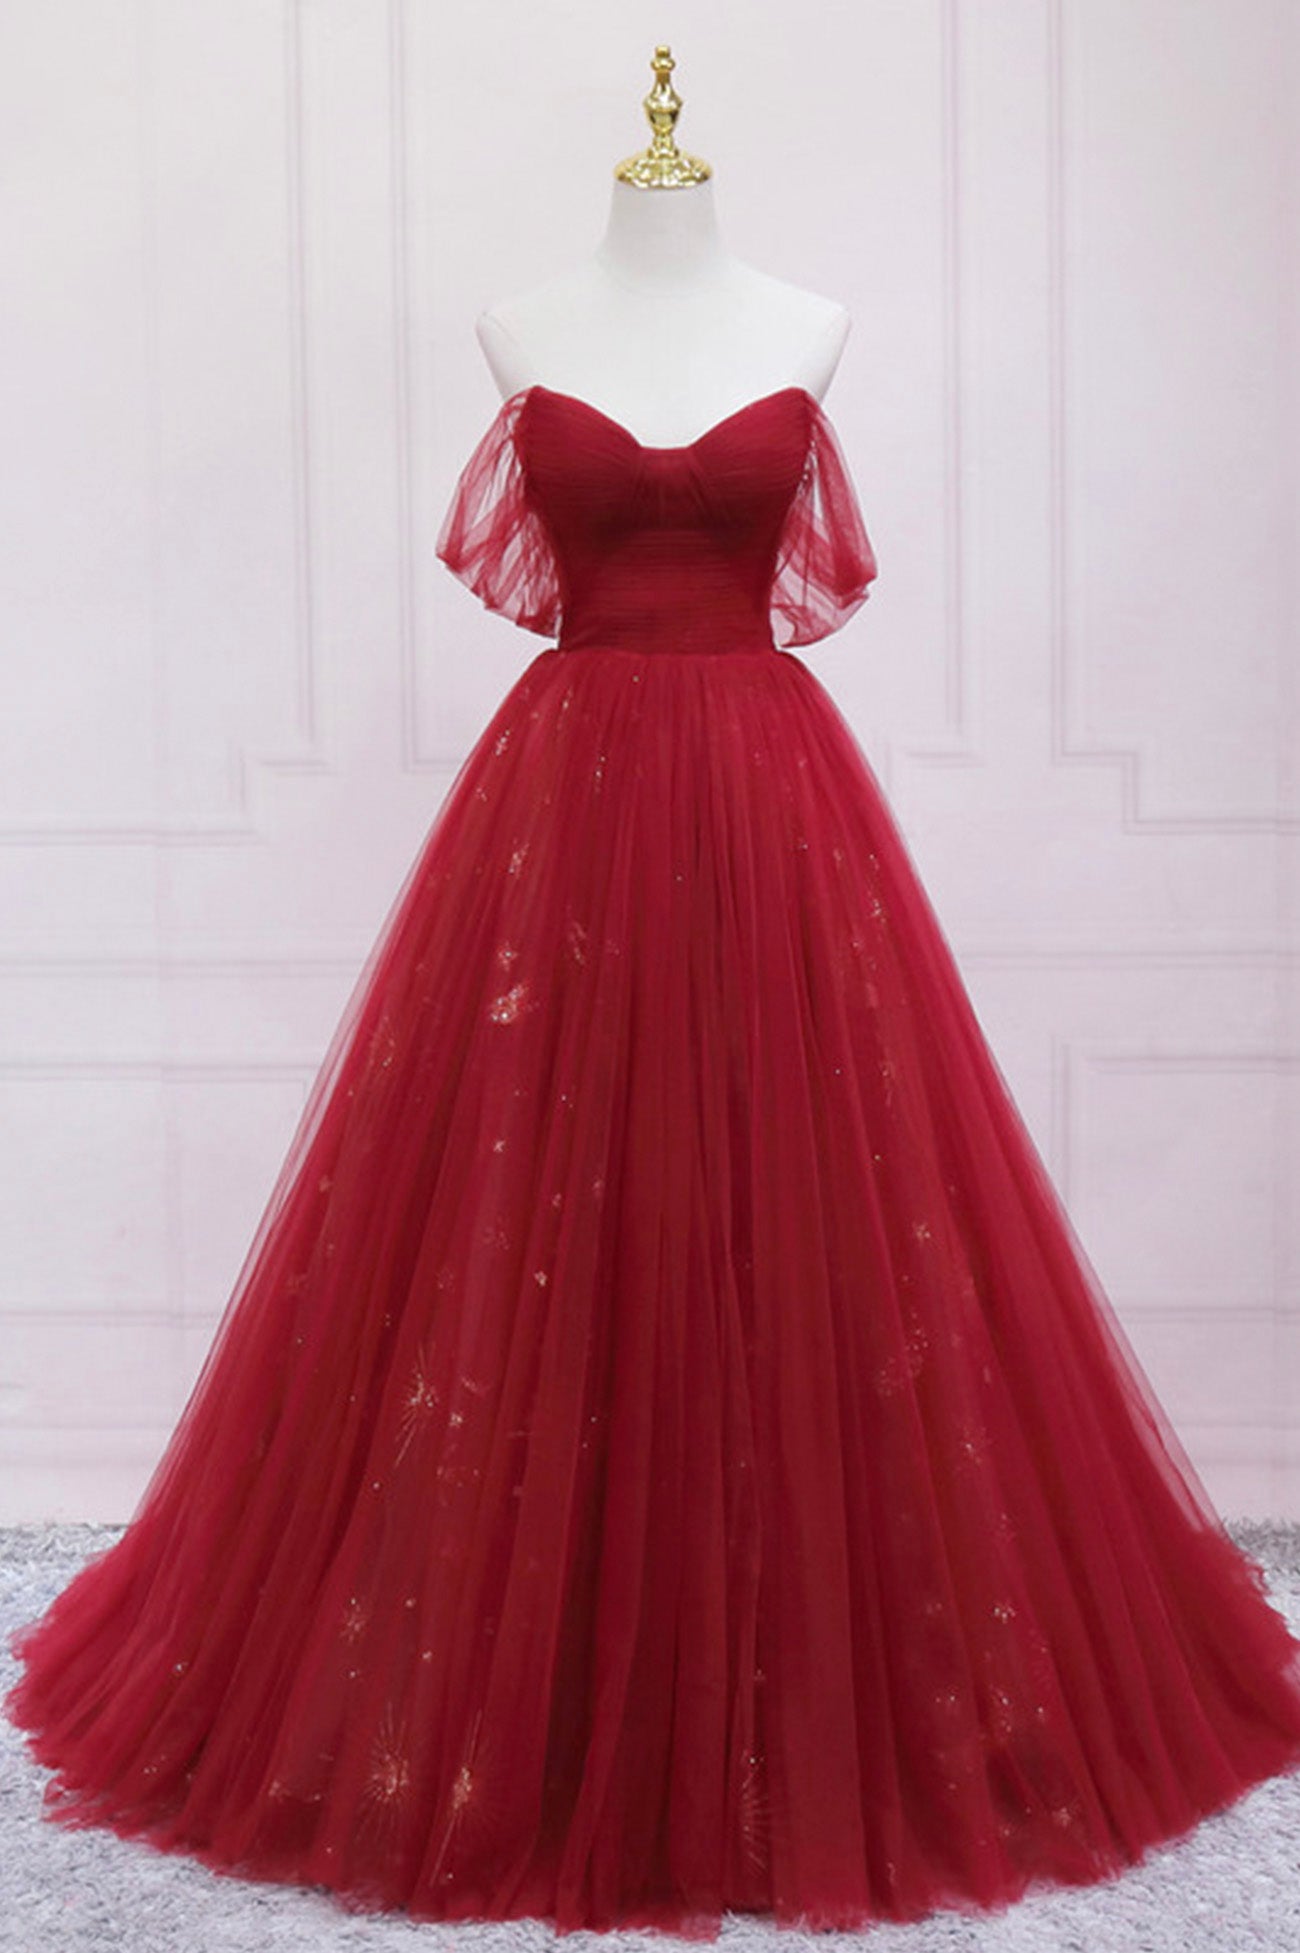 Dark Red Tulle Floor Length Prom Dress, Off the Shoulder Evening Party Dress